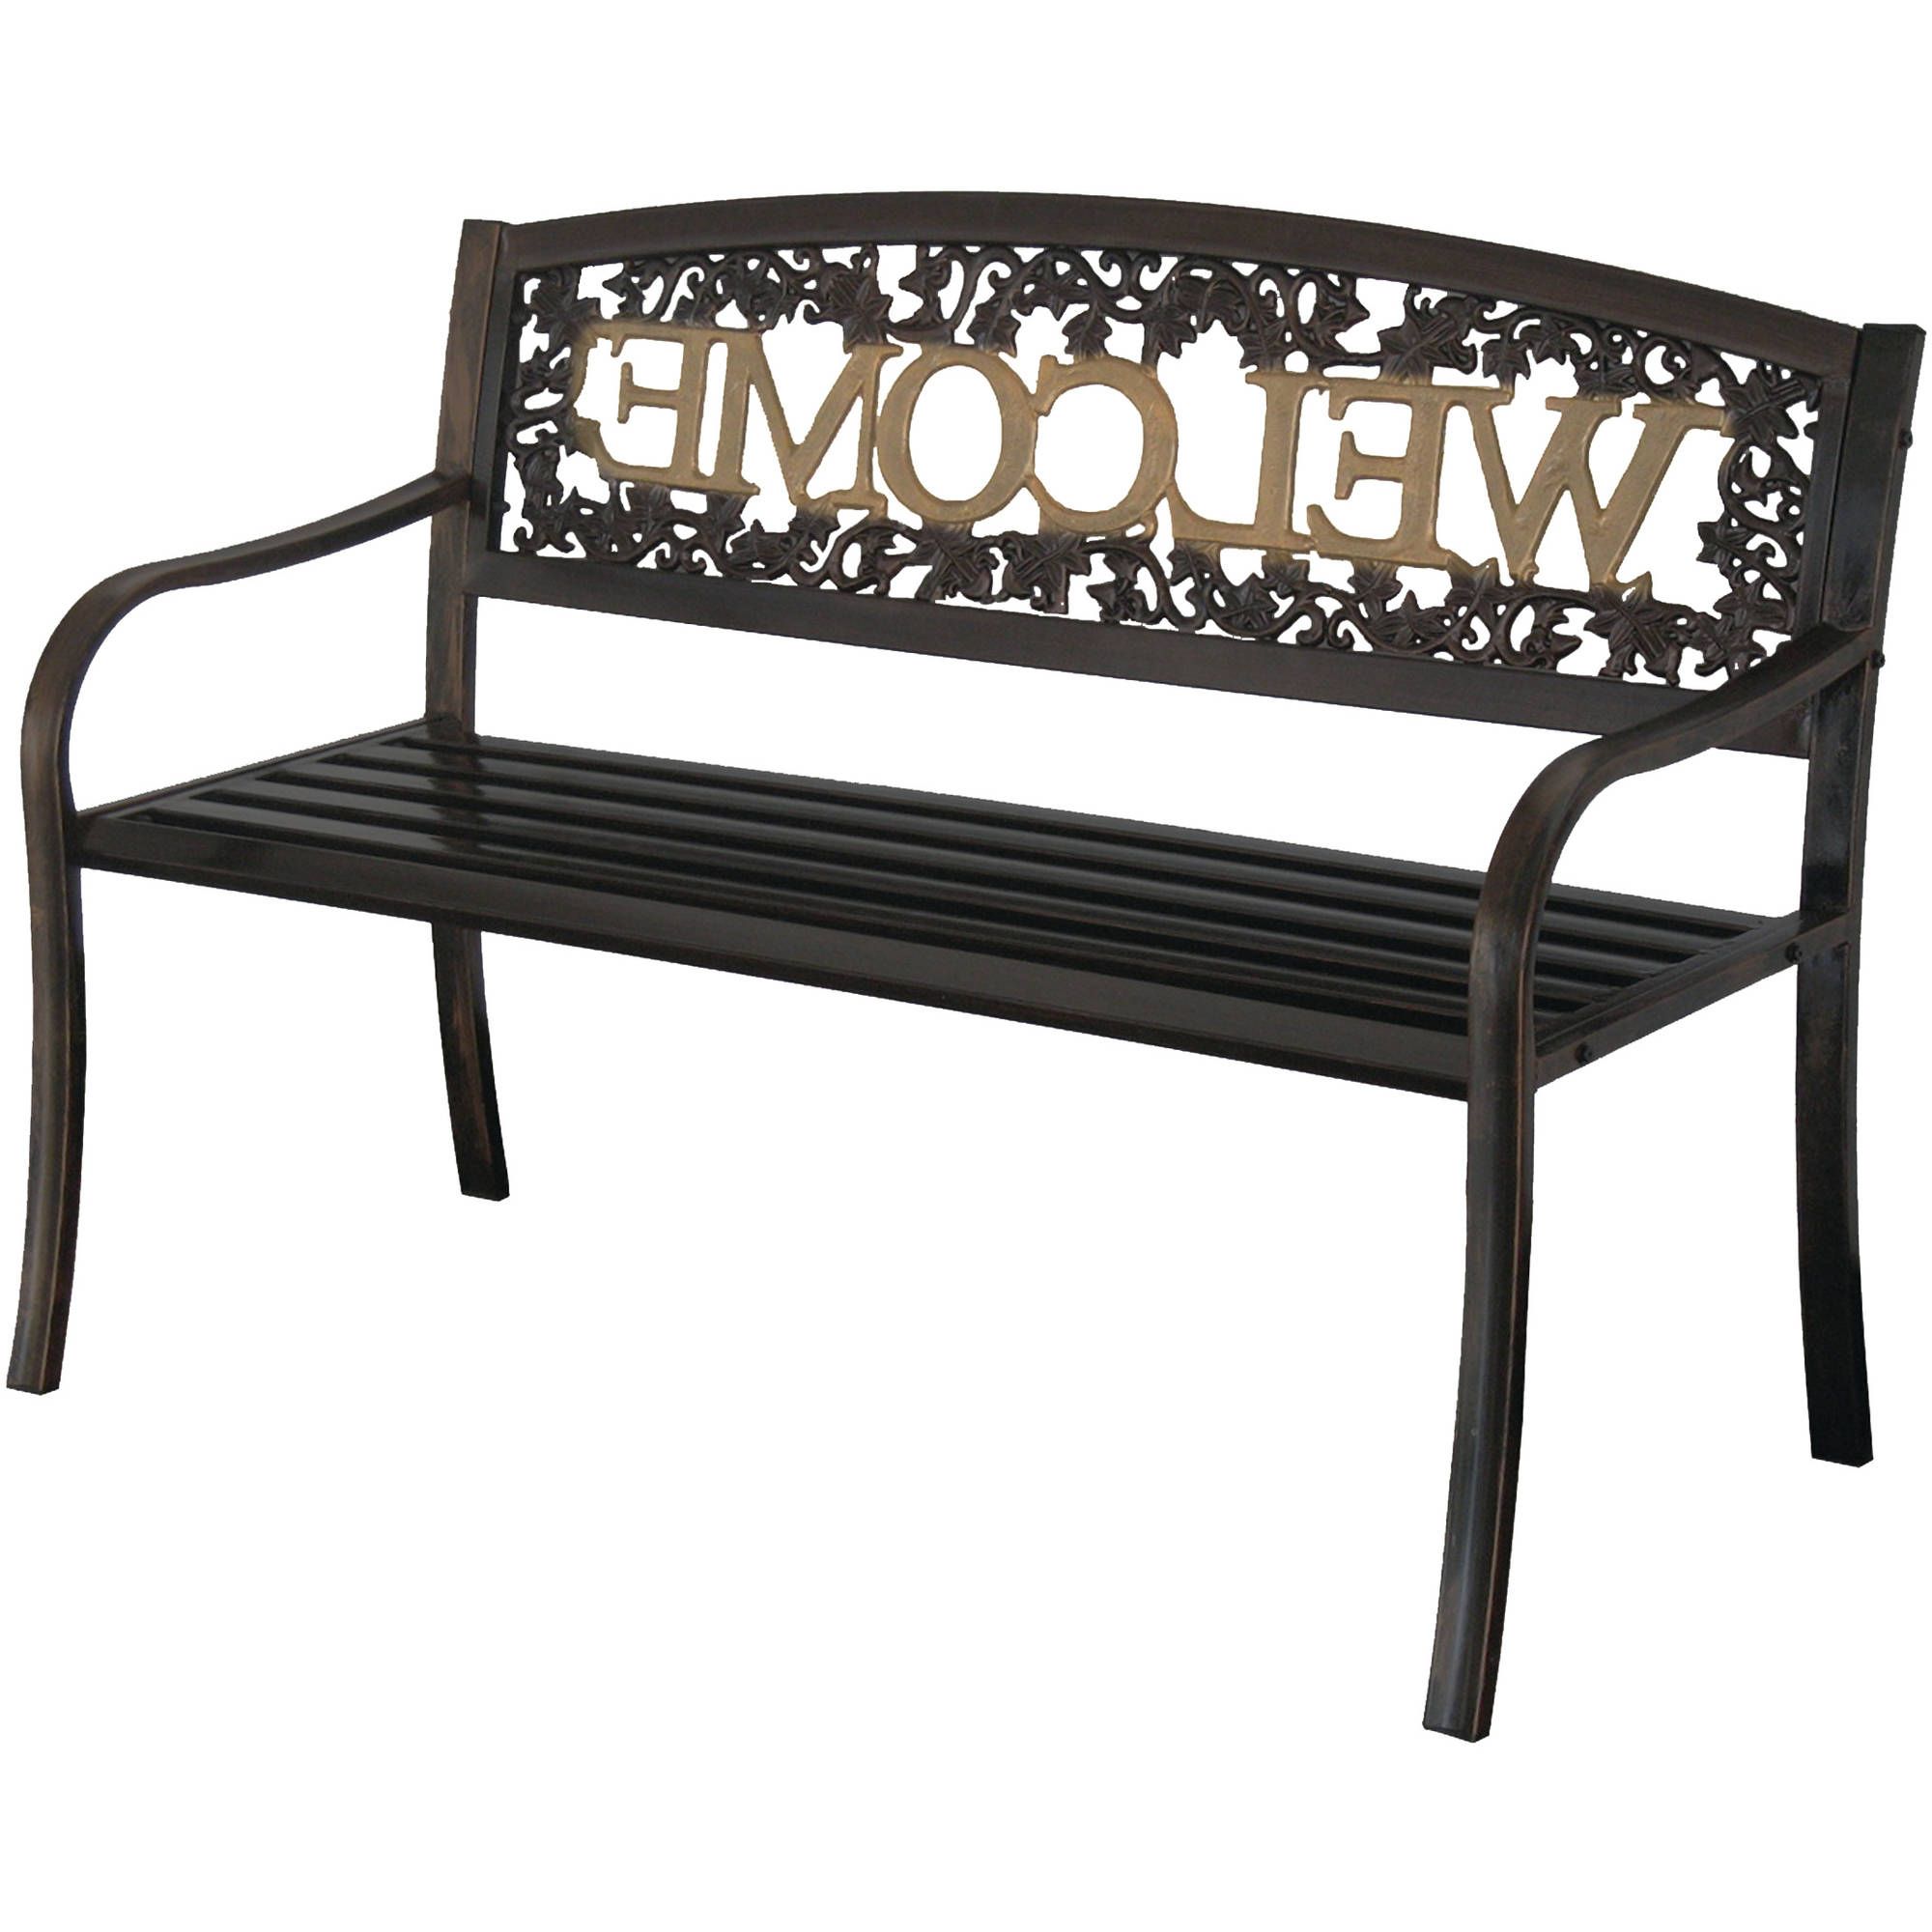 Most Current Black Steel Patio Swing Glider Benches Powder Coated Intended For Leigh Country Welcome Outdoor Garden Bench, Black/gold – Walmart (View 21 of 25)